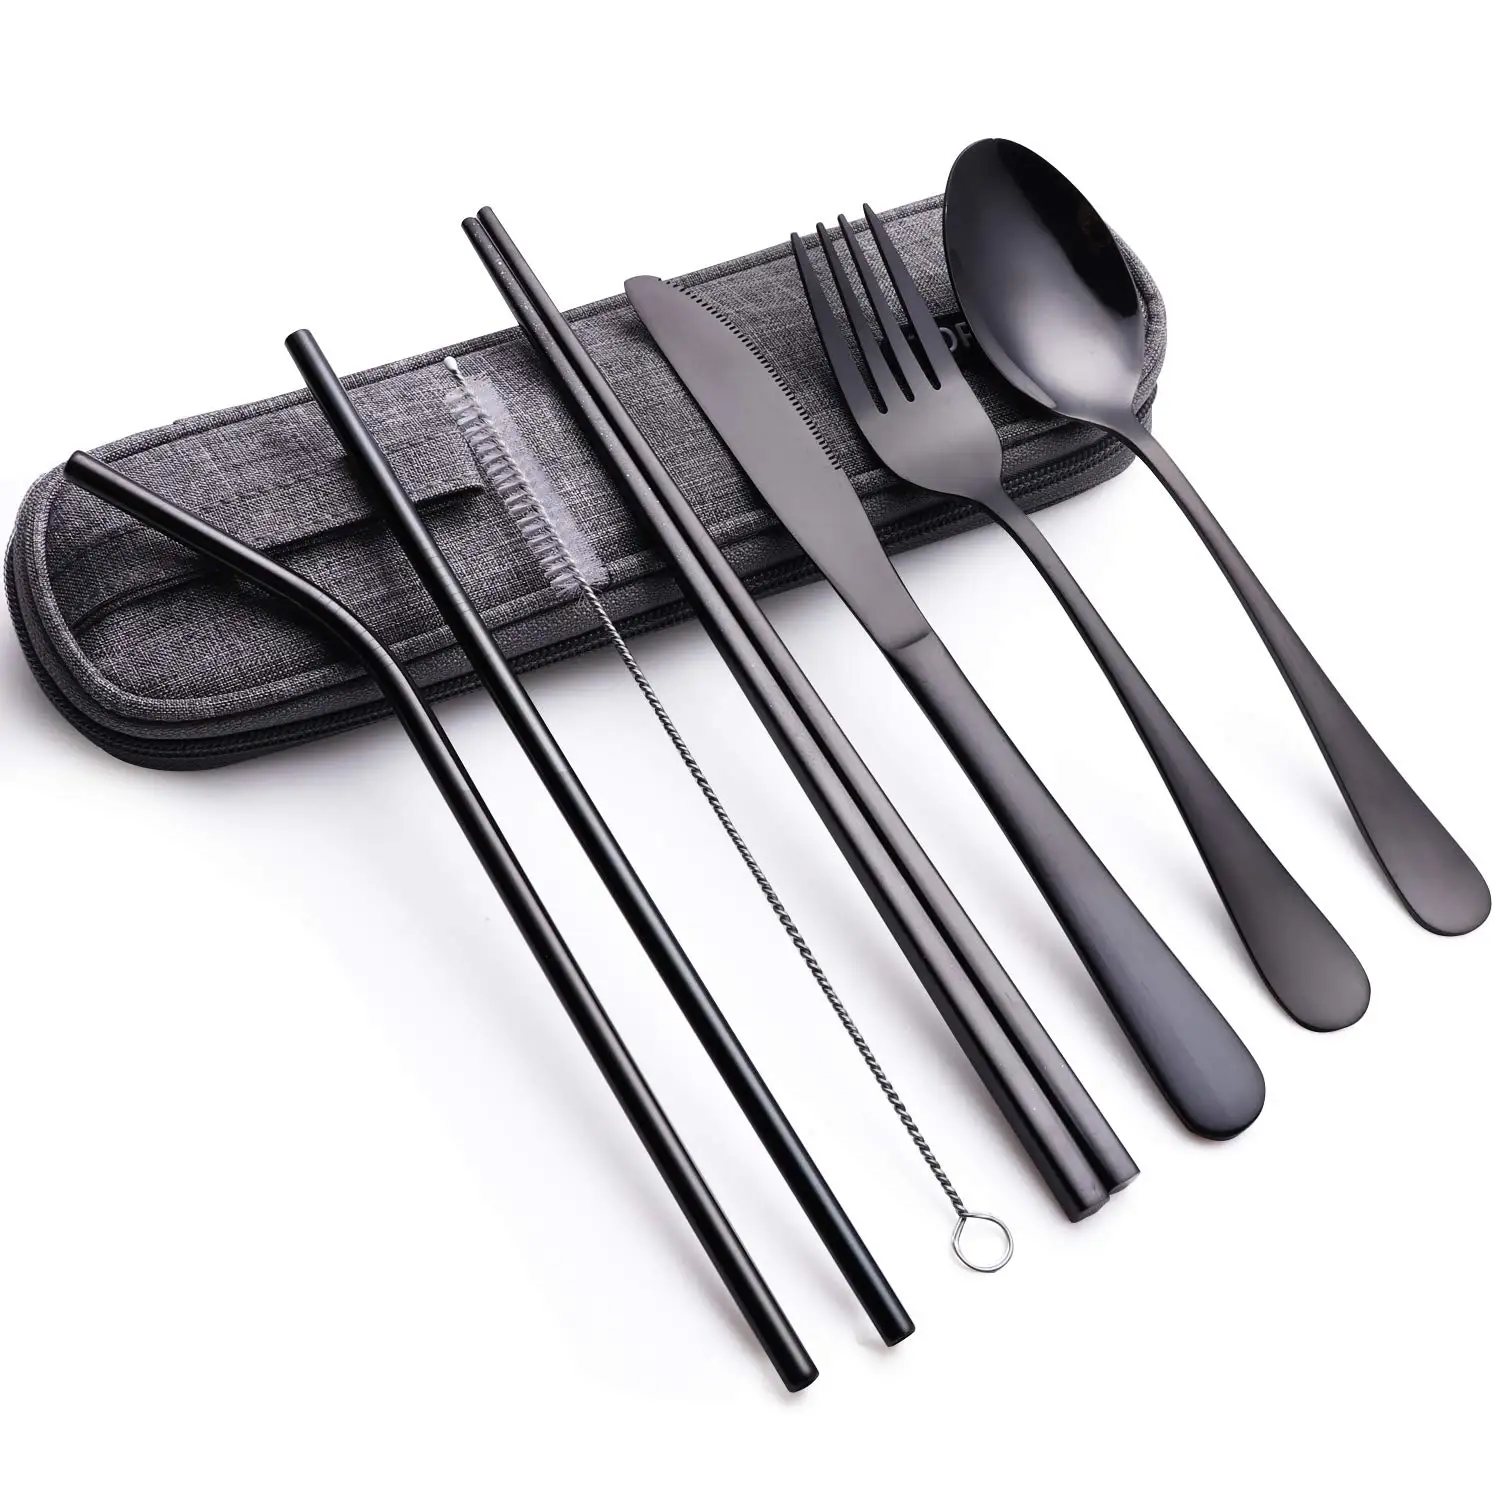 3Pcs/set  Tableware set Travel Camping Stainless Steel Cutlery Box Case Gift ODH 